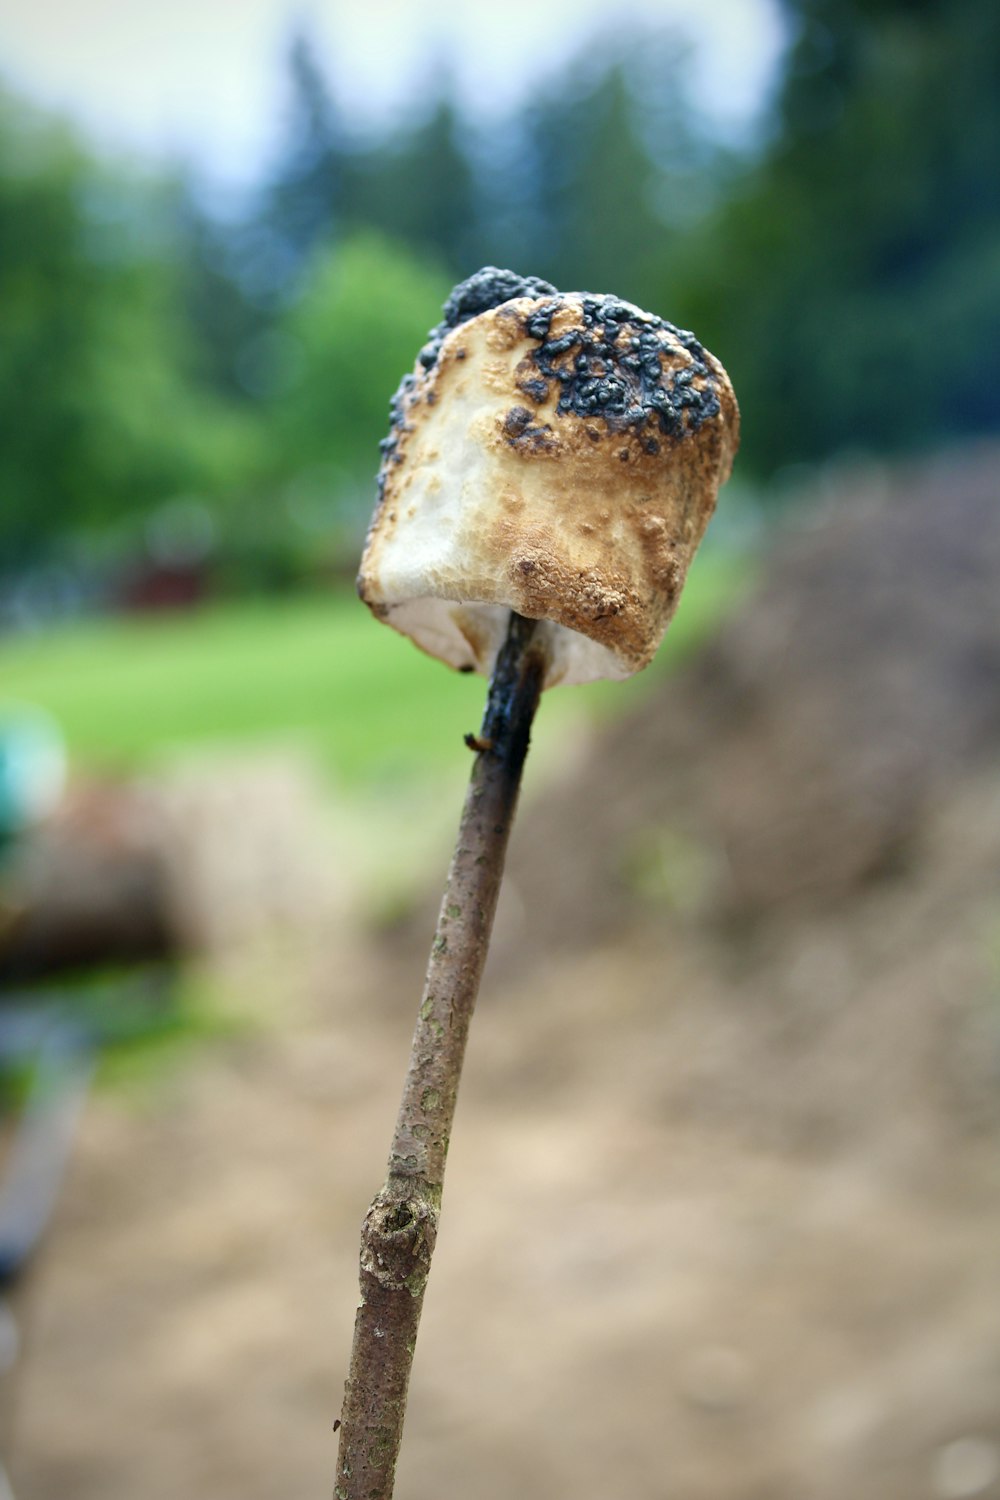 a close up of a piece of food on a stick